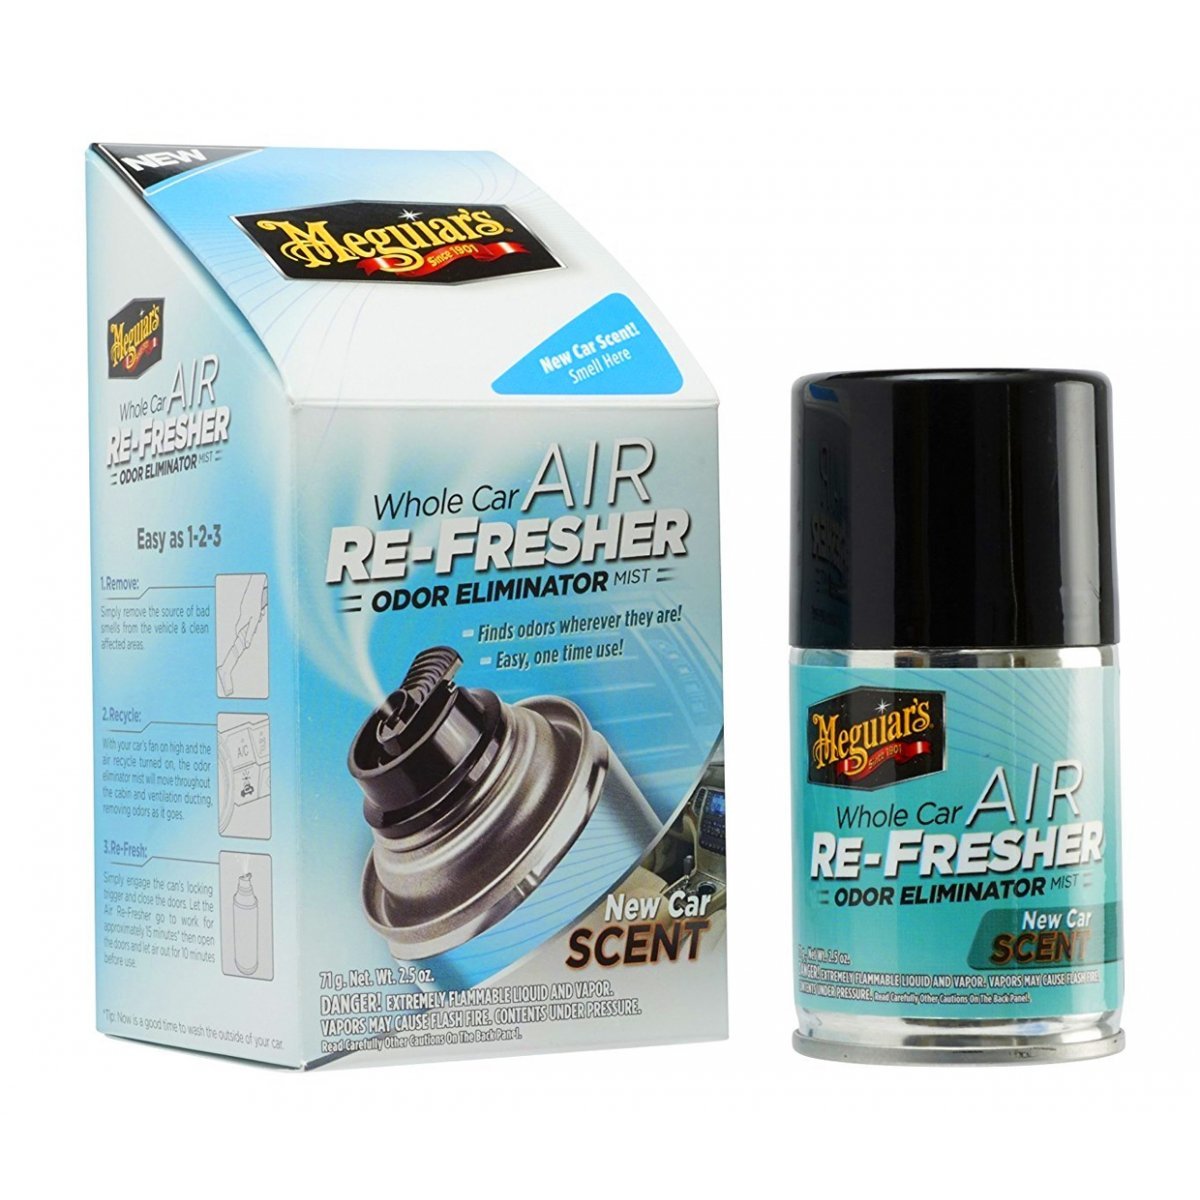 Meguiars Whole Car Air Re-Fresher Odour Eliminator New Car Scent 59ML